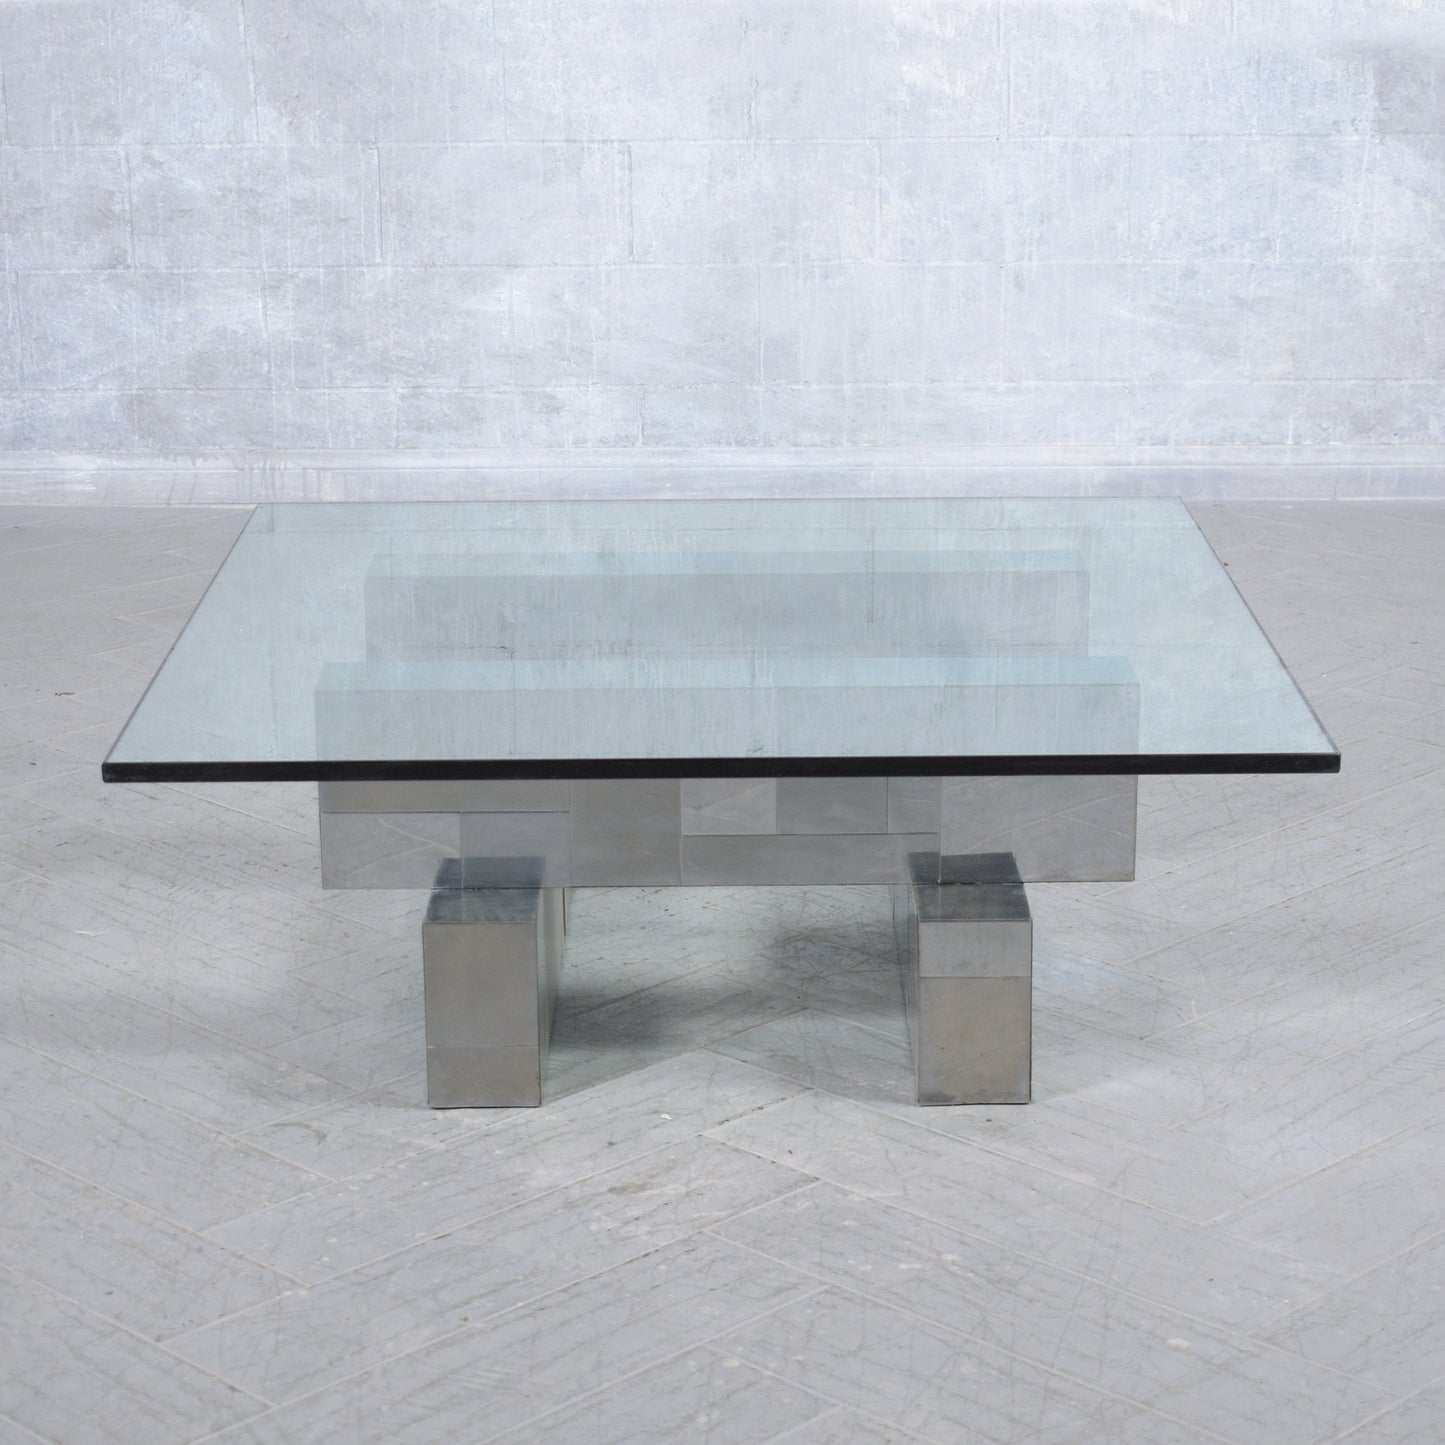 1960 Mid-Century Modern Paul Evans Inspired Coffee Table with Brushed Steel Base